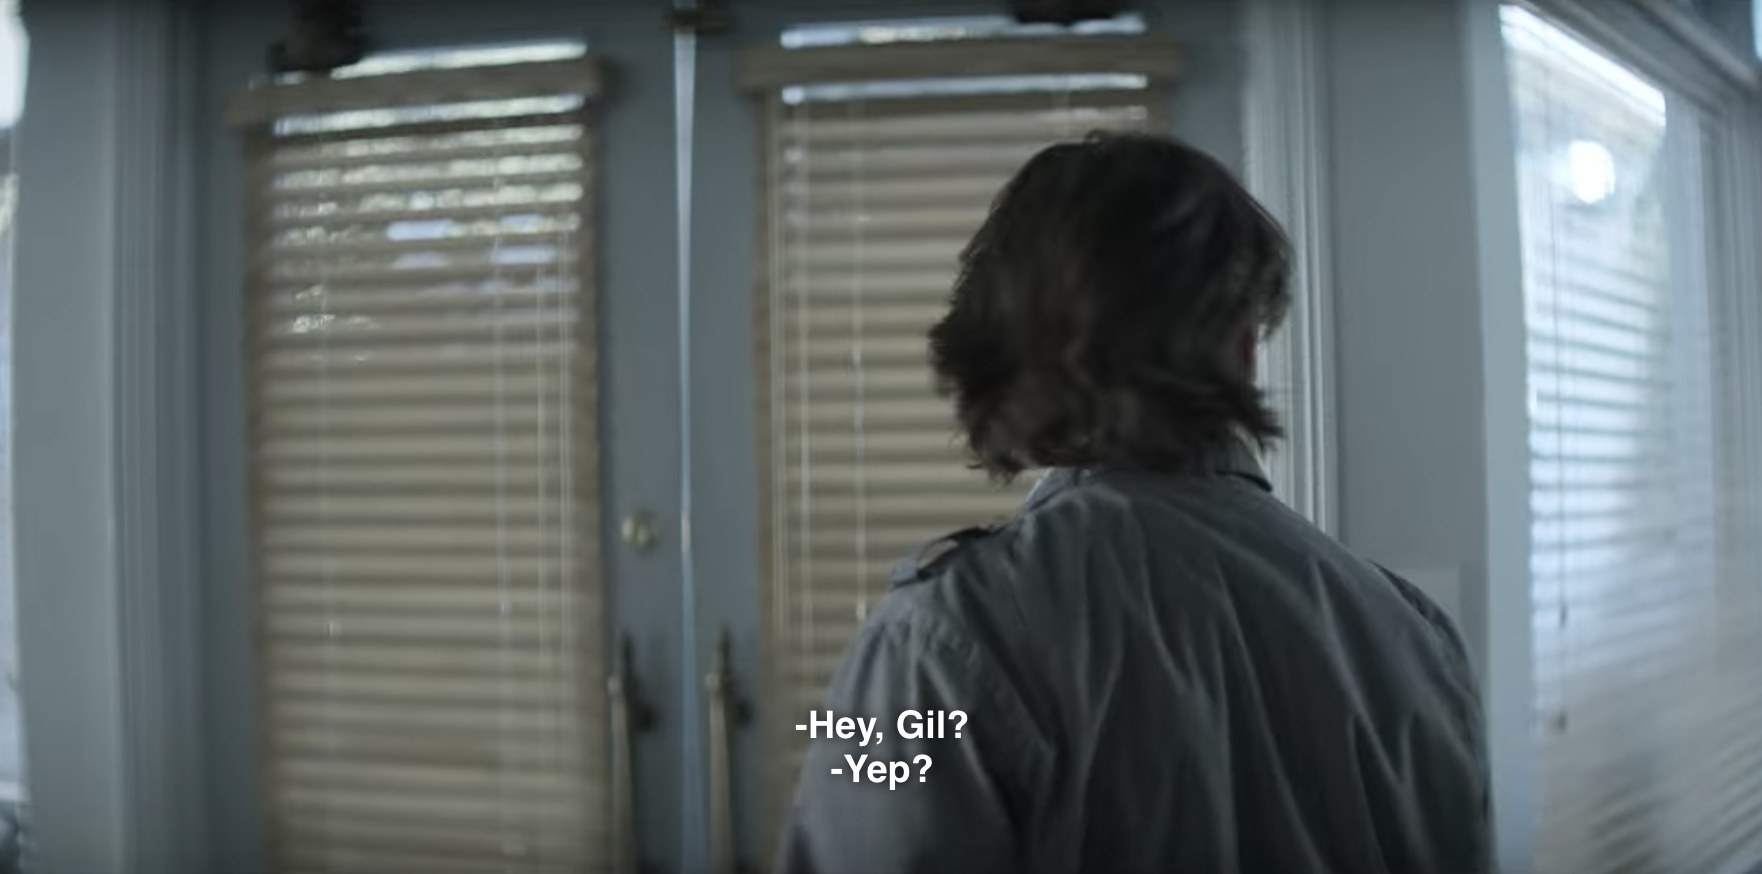 Gil has turned away from the screen with the back of his head aimed at us. The caption of what Love ( who is offscreen) is saying to him reads, &quot;Hey, Gil?&quot; The Caption of what Gil replies is Yep